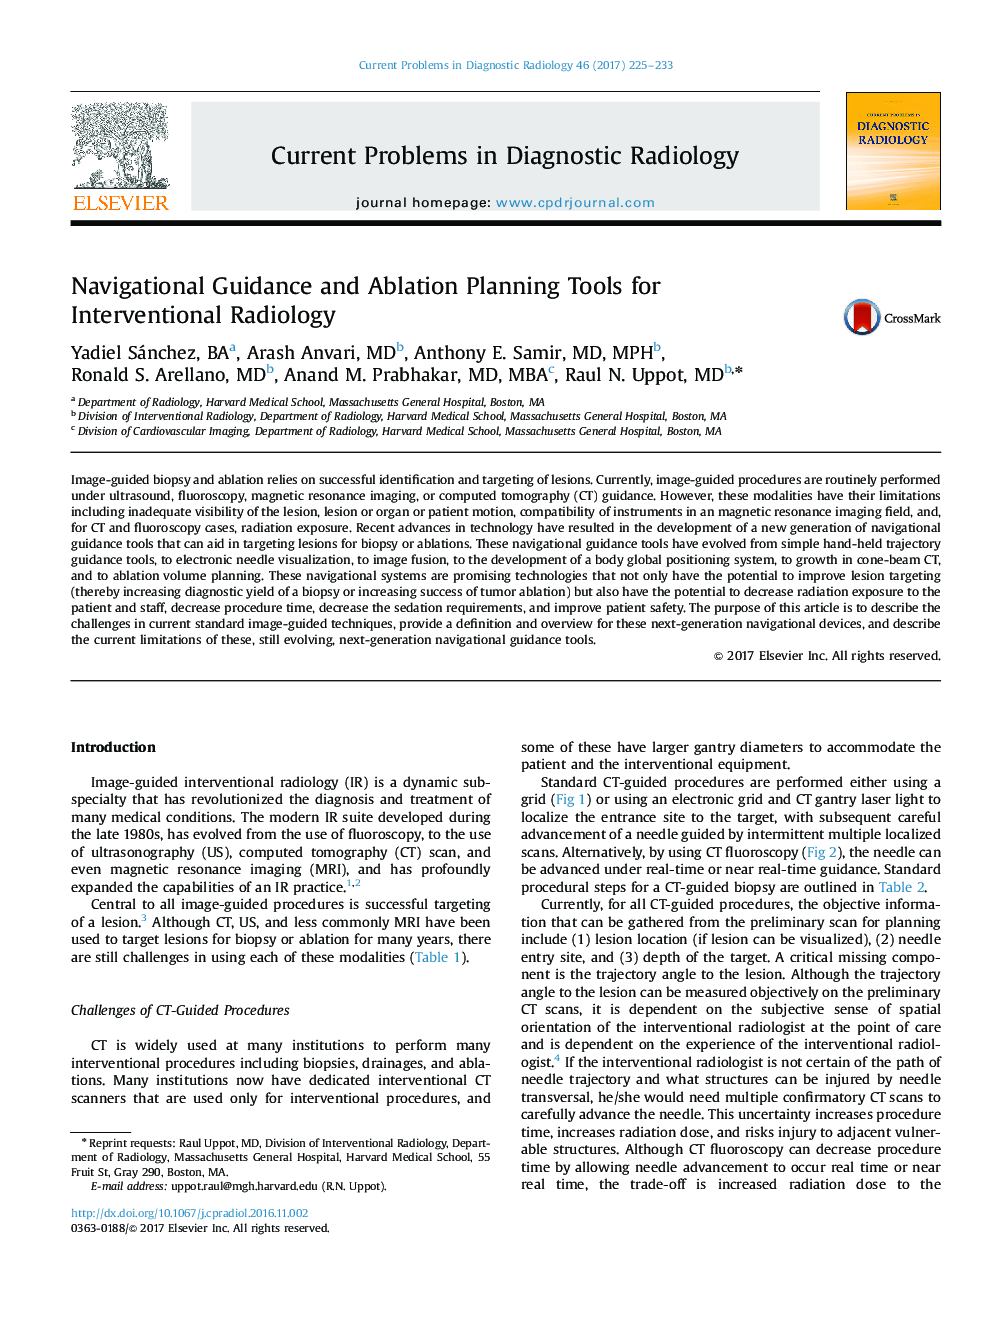 Navigational Guidance and Ablation Planning Tools for Interventional Radiology